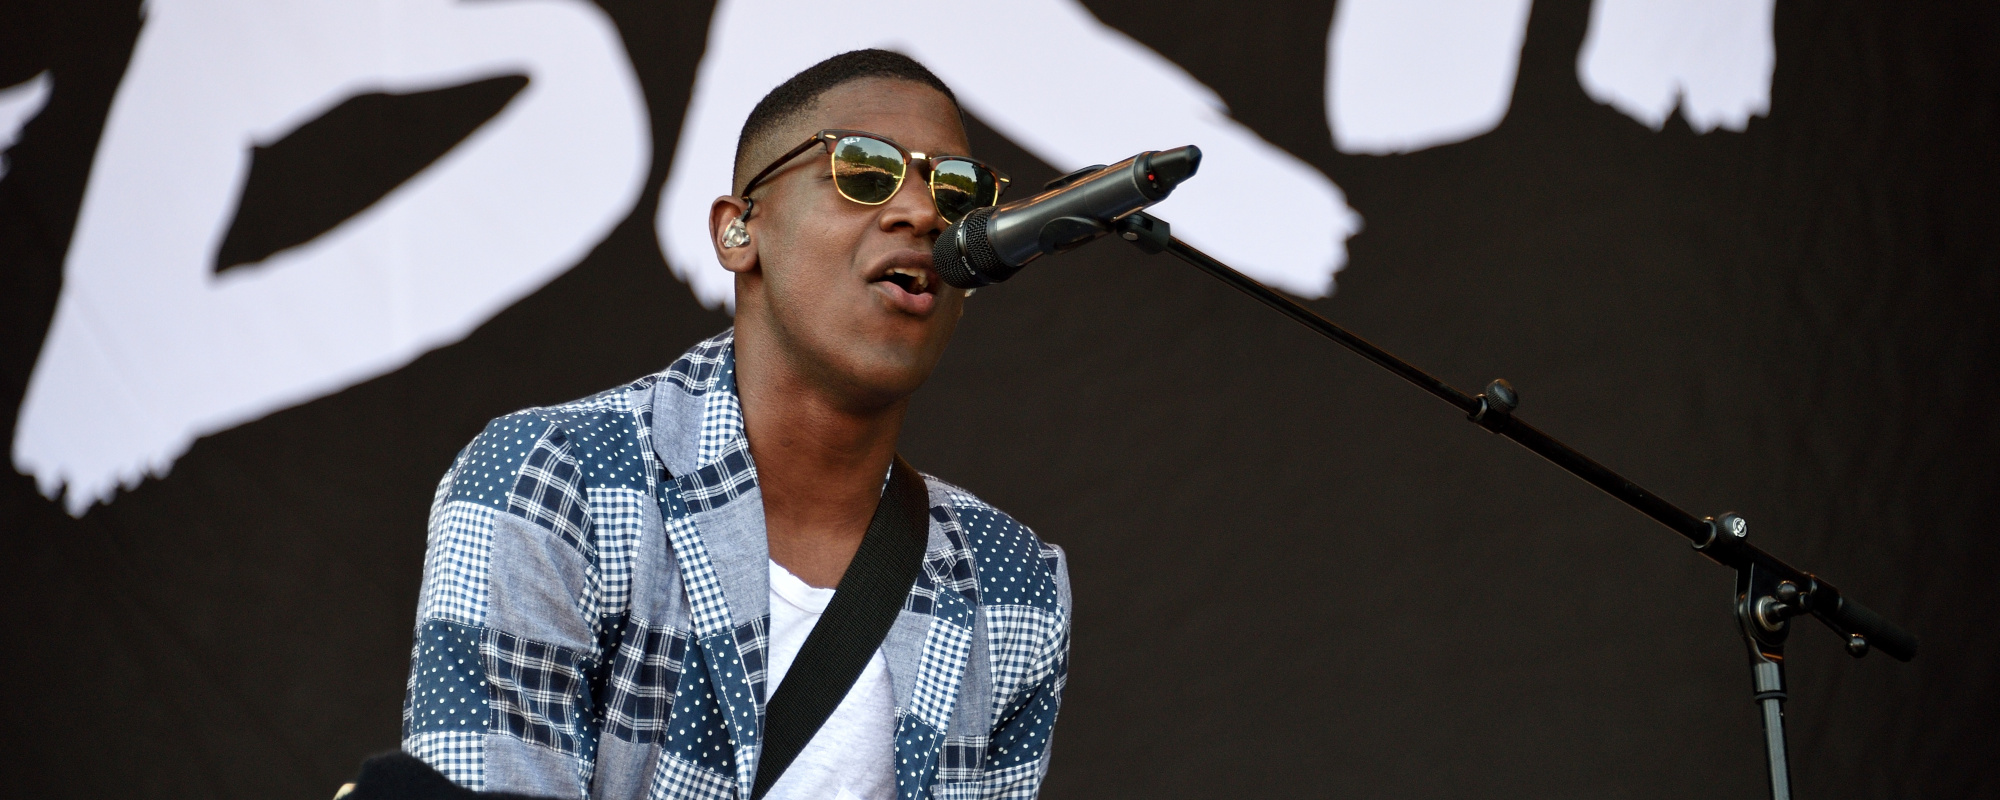 The Deeper Meaning Behind Labrinth’s “Mount Everest”